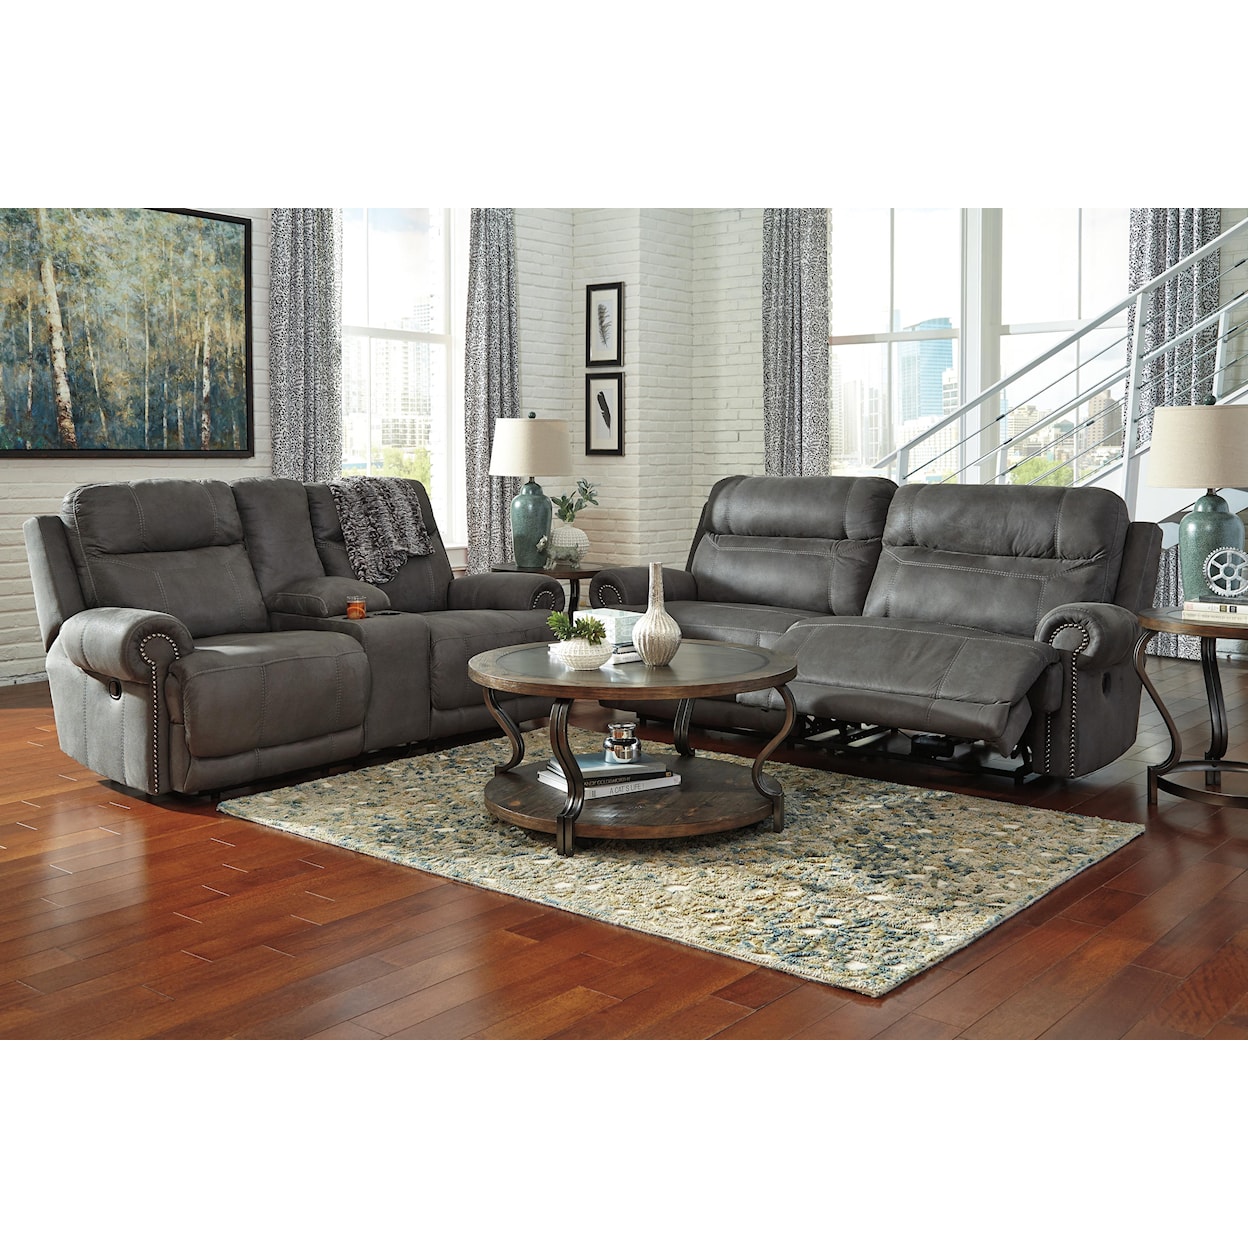 Signature Design by Ashley Austere Double Reclining Loveseat w/ Console